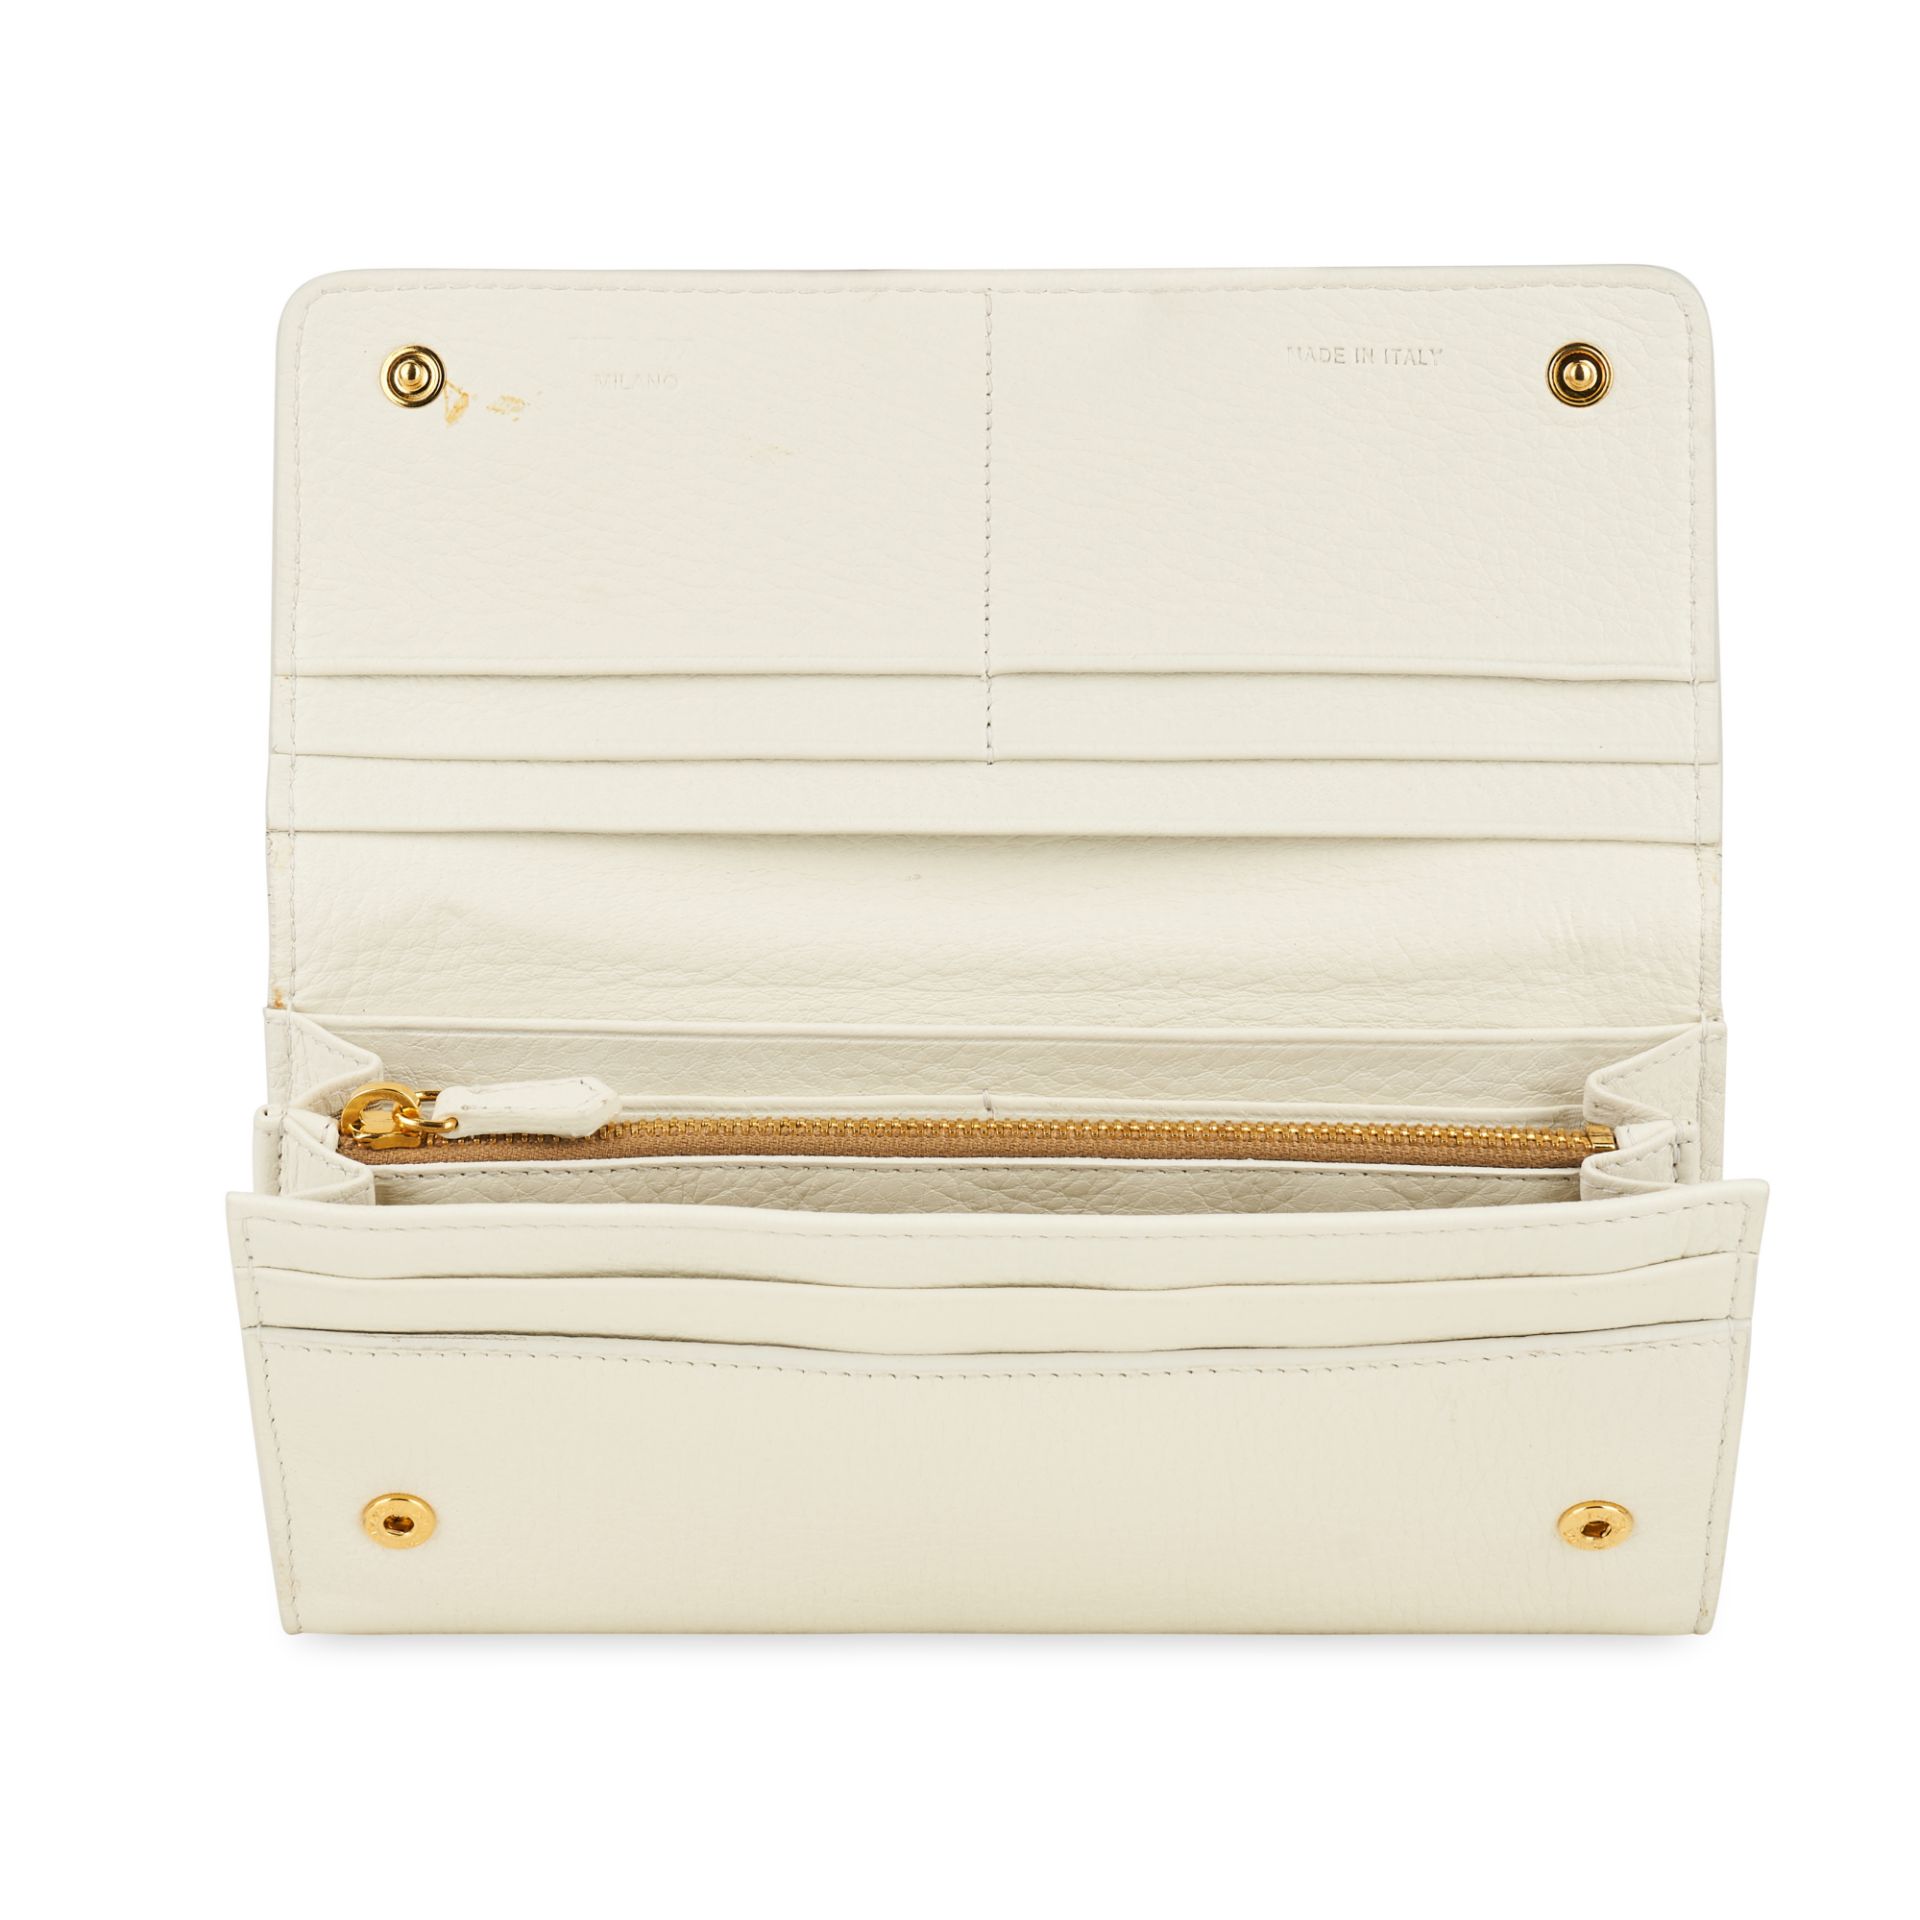 PRADA CREAM GRAINED LEATHER WALLET Condition grade B. 19cm long, 9cm high. Cream toned grained ... - Image 3 of 4